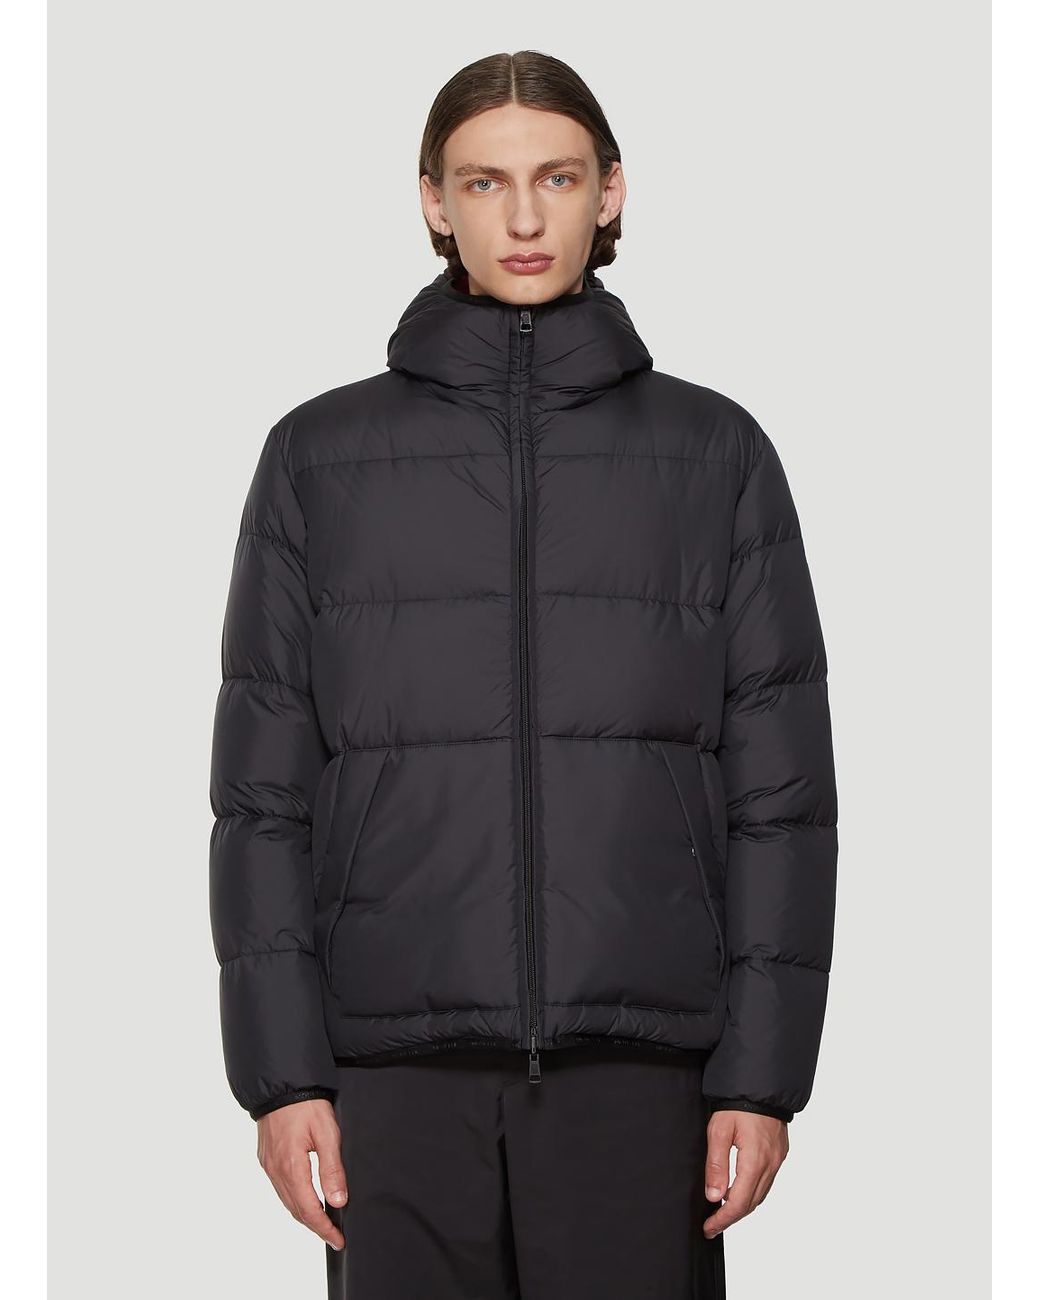 Moncler Synthetic Reversible Padded Jacket In Black for Men - Lyst